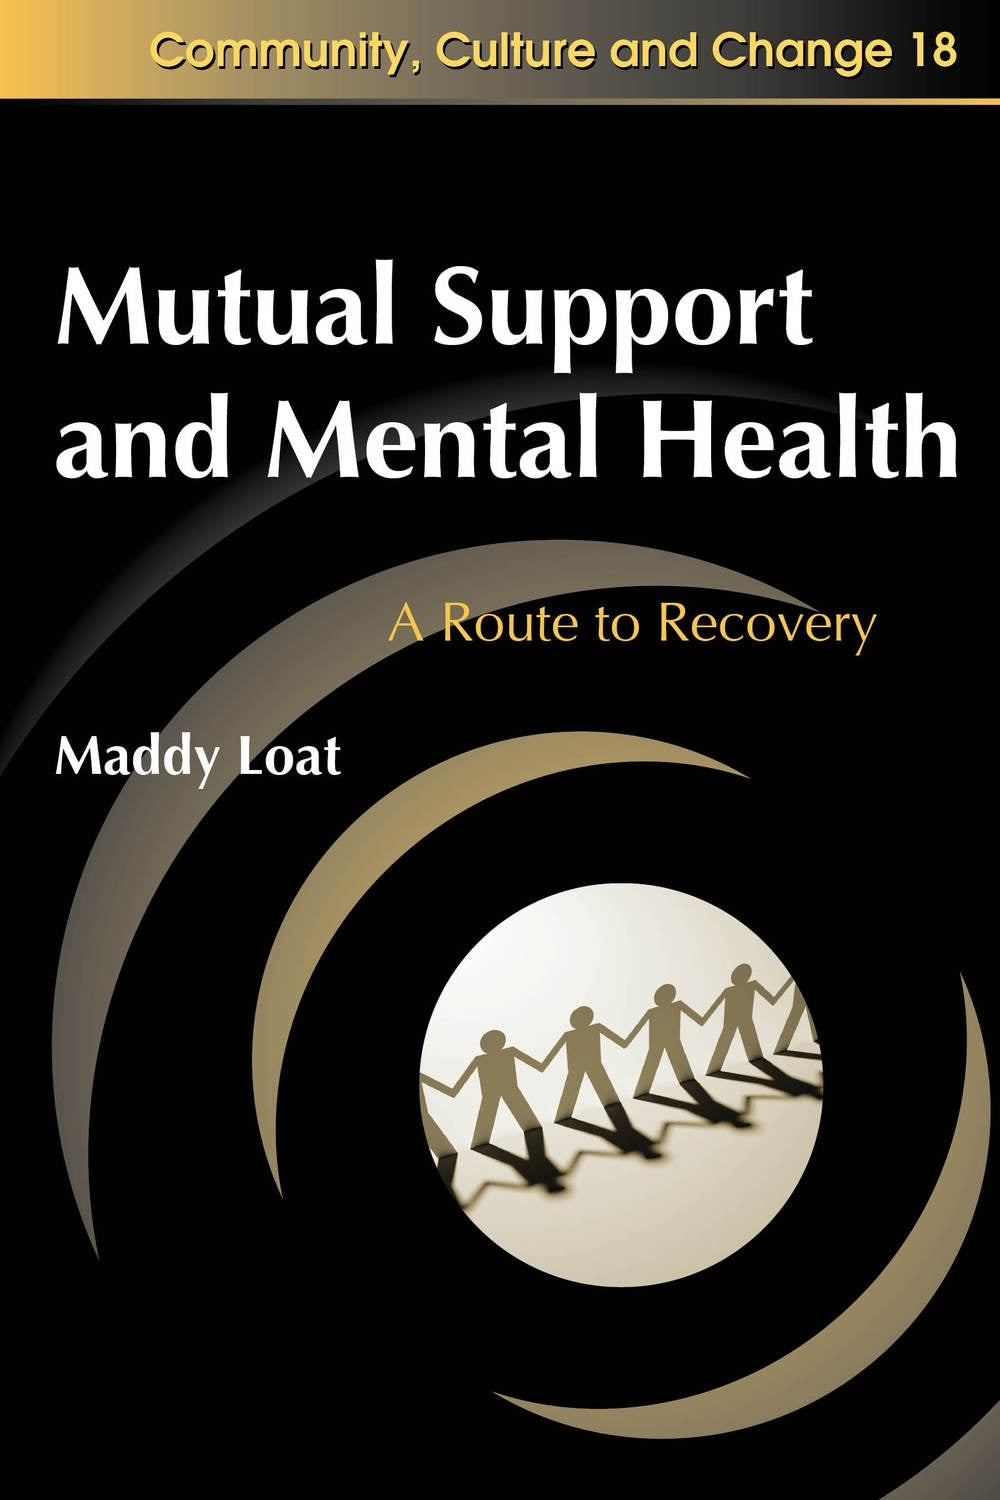 Mutual Support and Mental Health by Maddy Loat